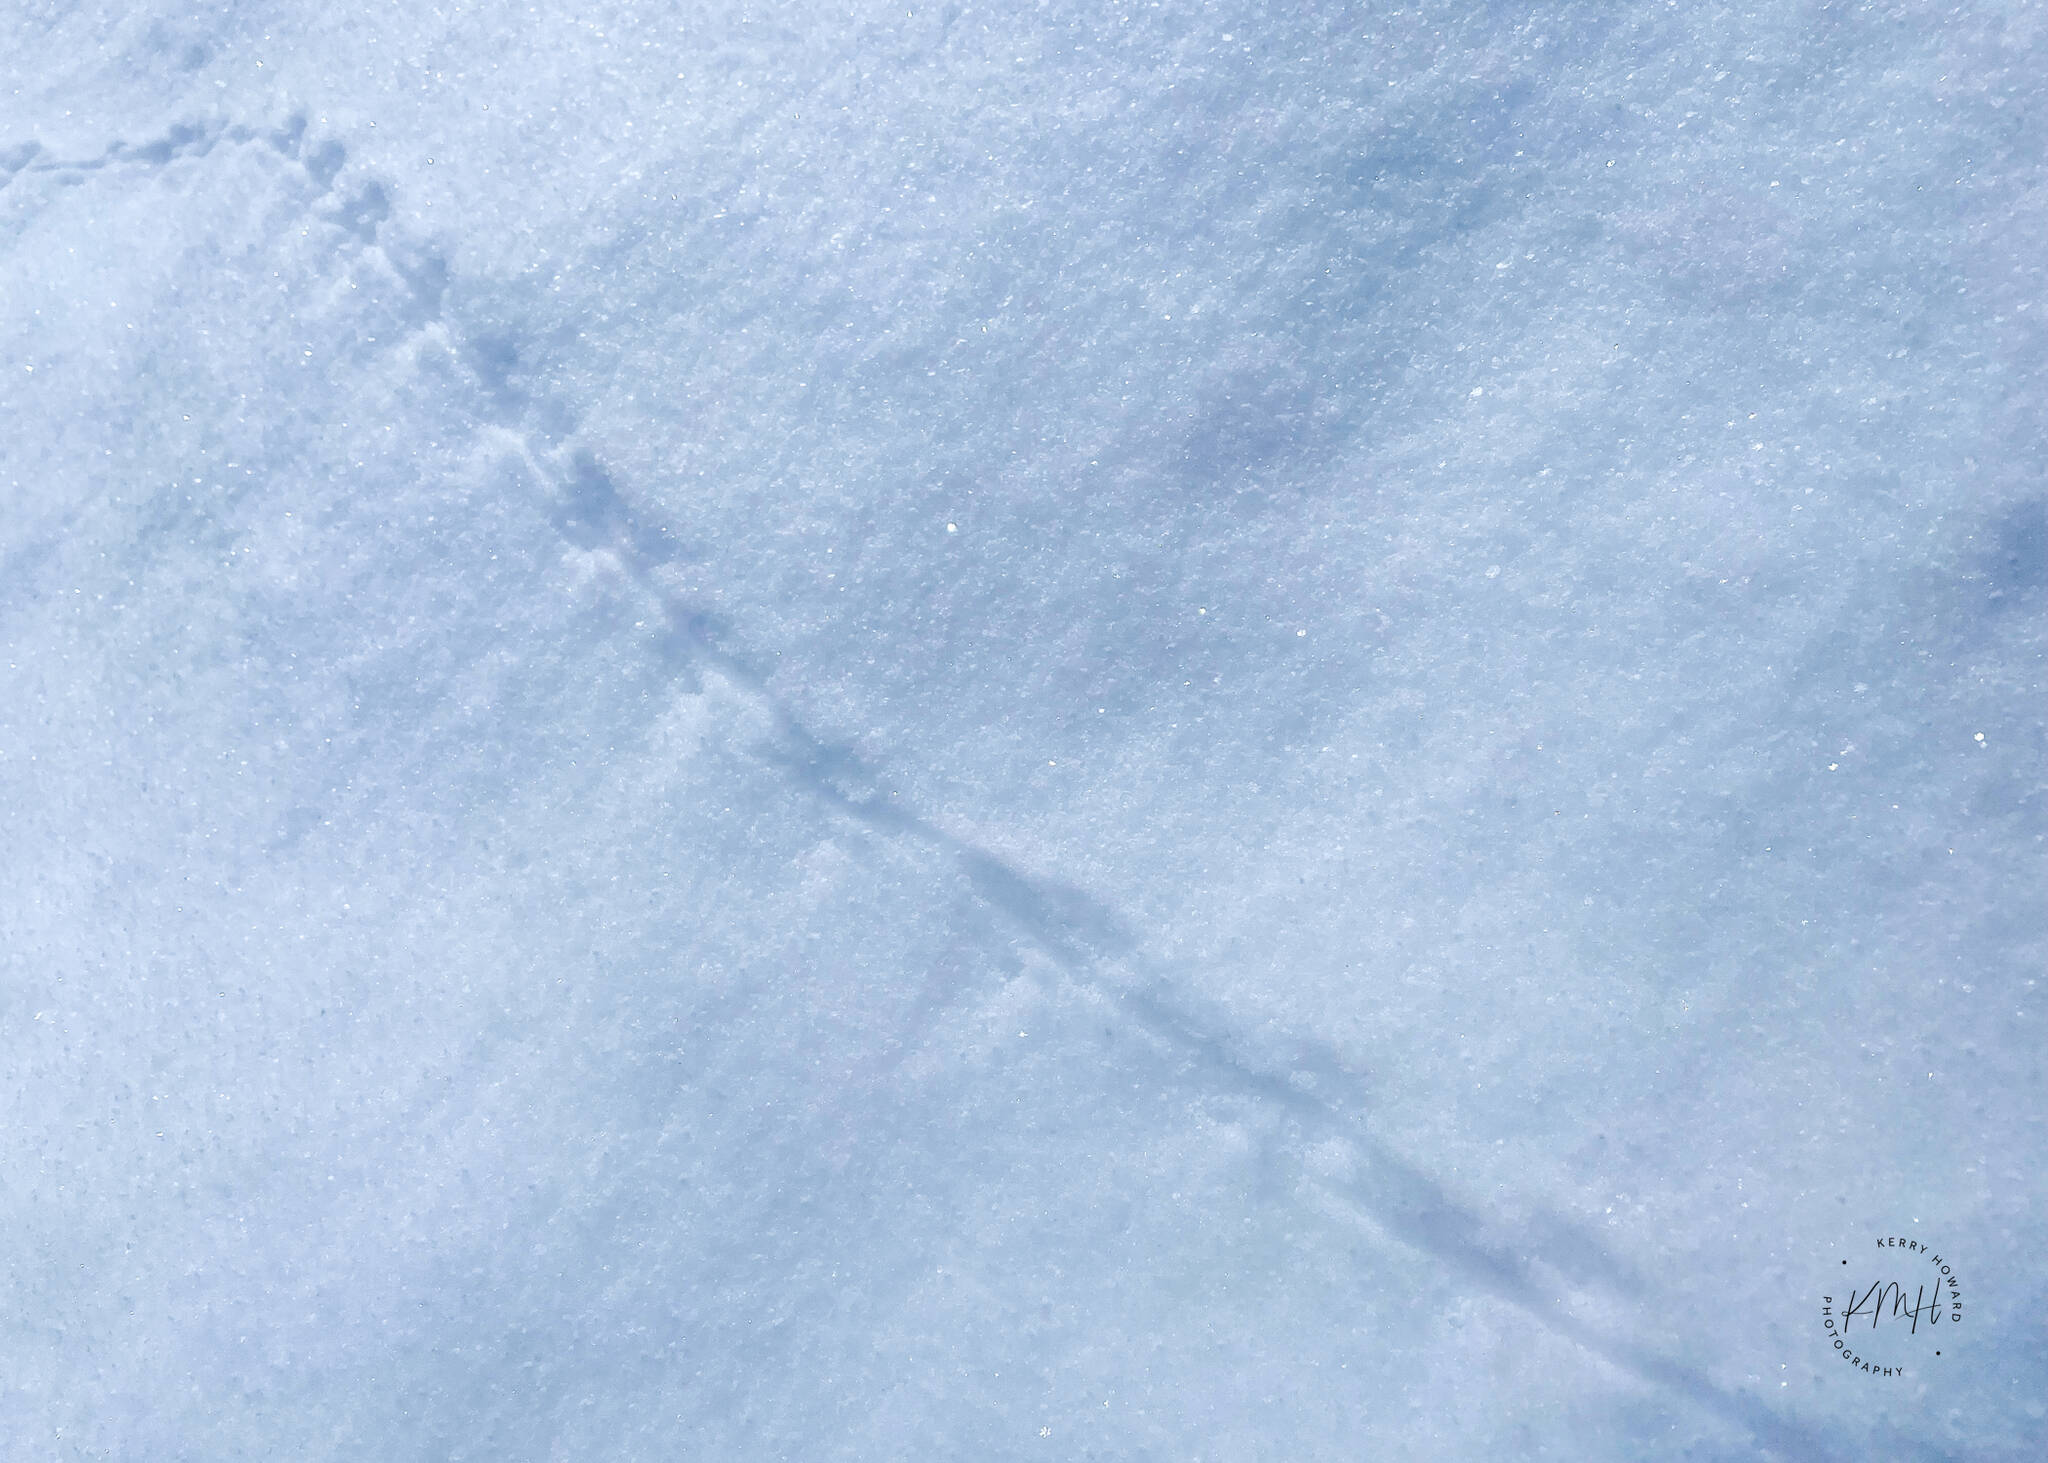 A shrew traveled over a light crust of snow for a long distance. (Courtesy Photo / Kerry Howard)